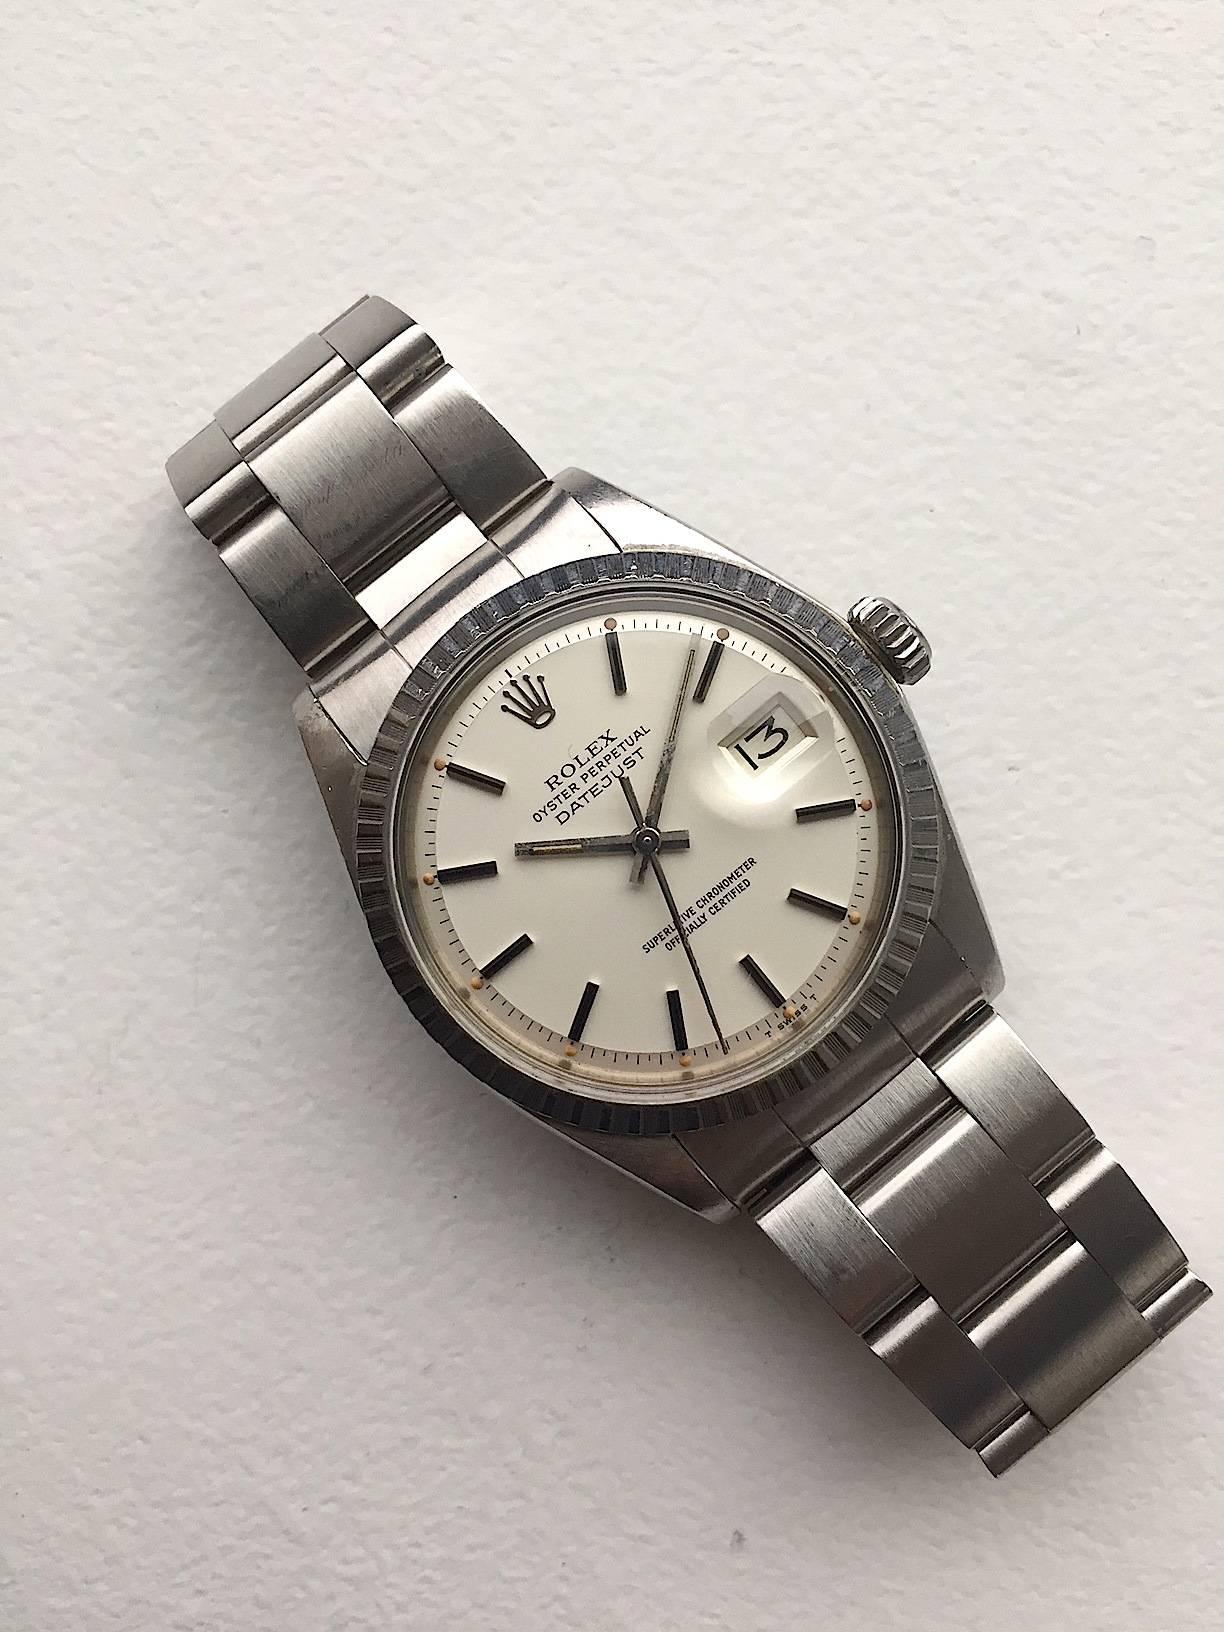 Rolex Stainless Steel Oyster Perpetual Datejust Wristwatch
Beautiful Factory Oyster (Silver) Mirror Dial with Applied Hour Markers and Lume Plots With a Pumpkin Color 
Stainless Steel Engine-Turned Bezel
Stainless Steel Case
36mm in size 
Features